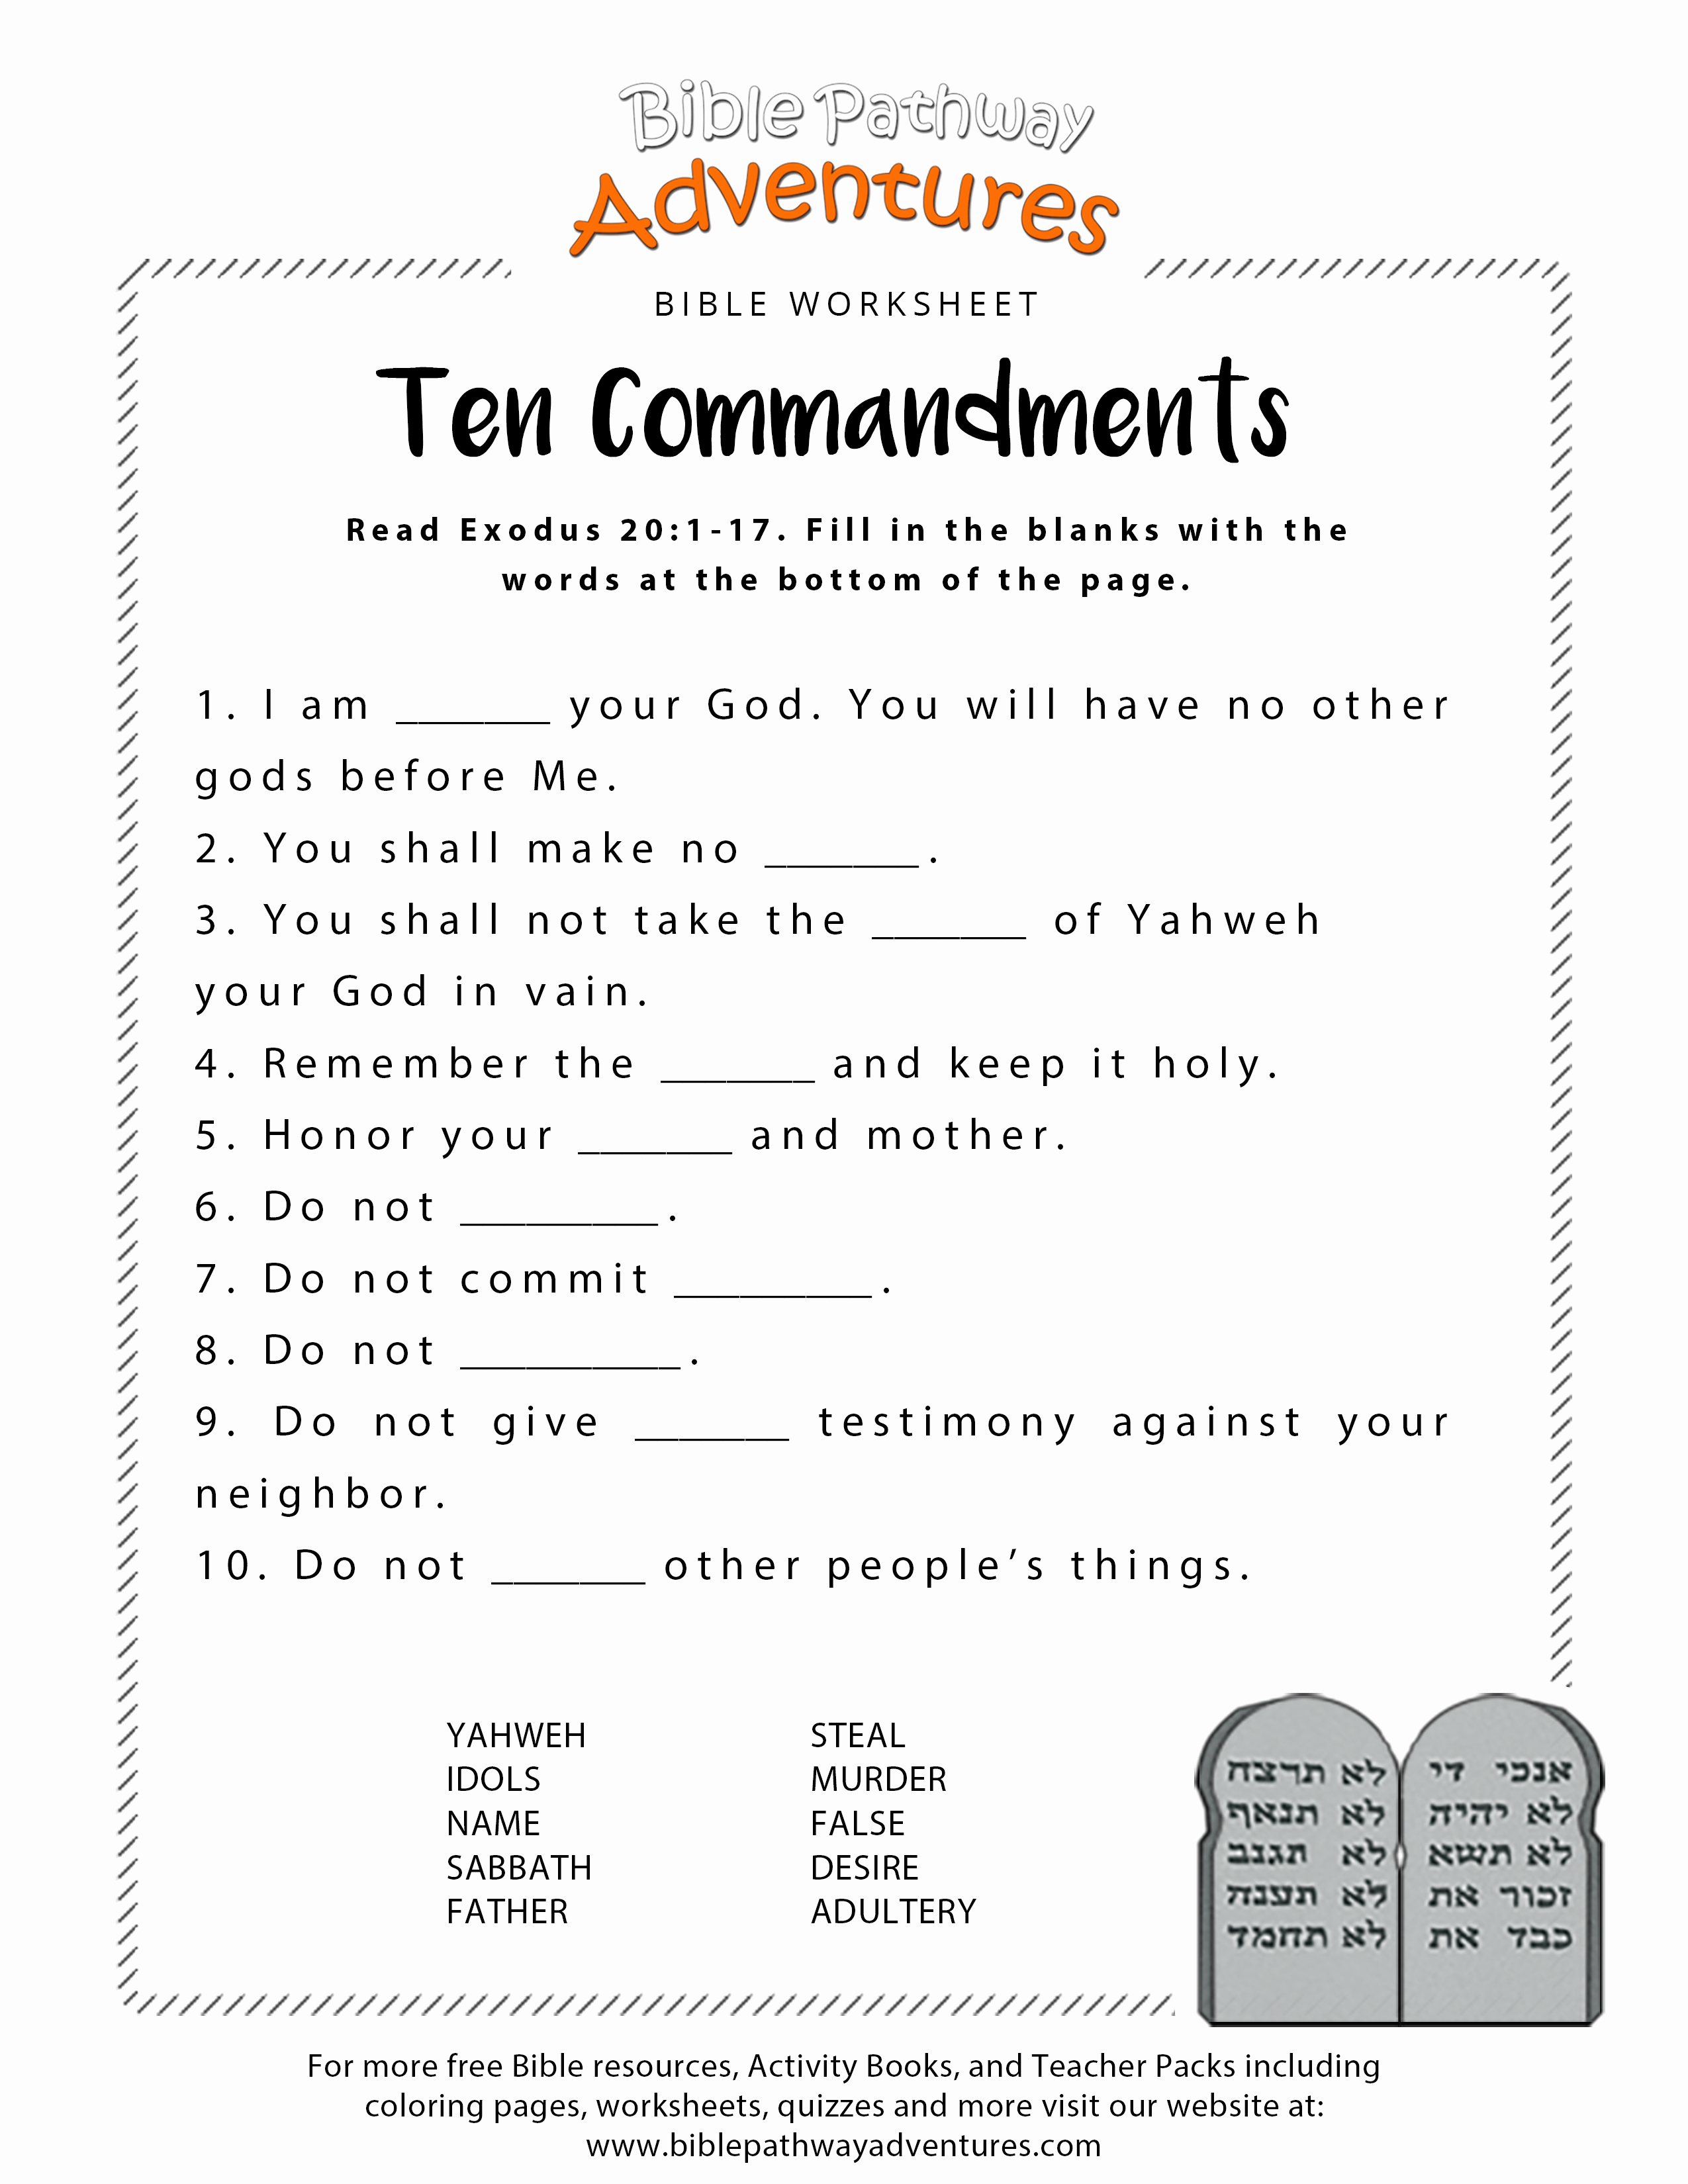 free-printable-bible-study-worksheets-for-youth-printable-worksheets